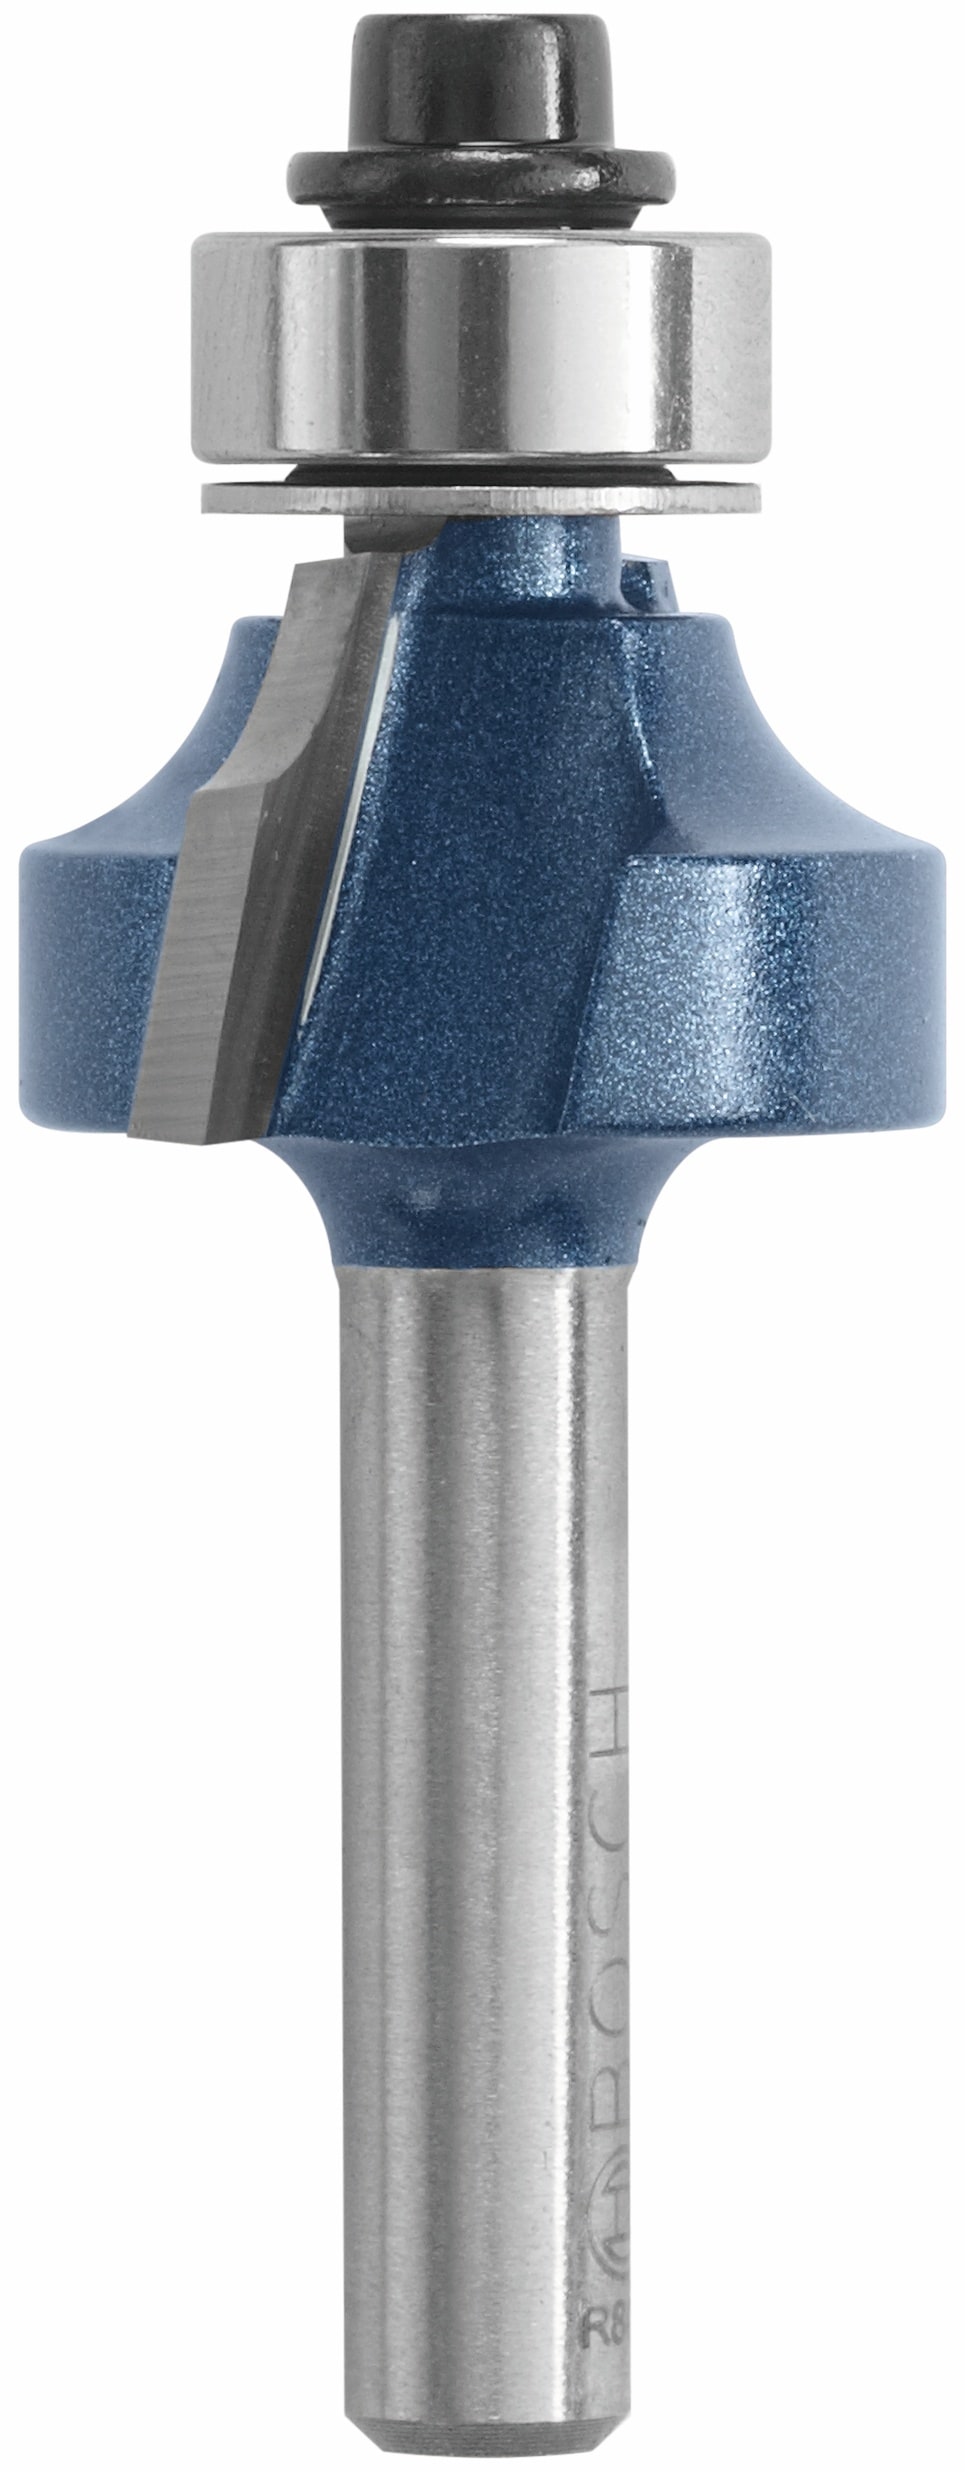 Bosch 3/16-in Carbide-Tipped Roundover Router Bit in the Edge